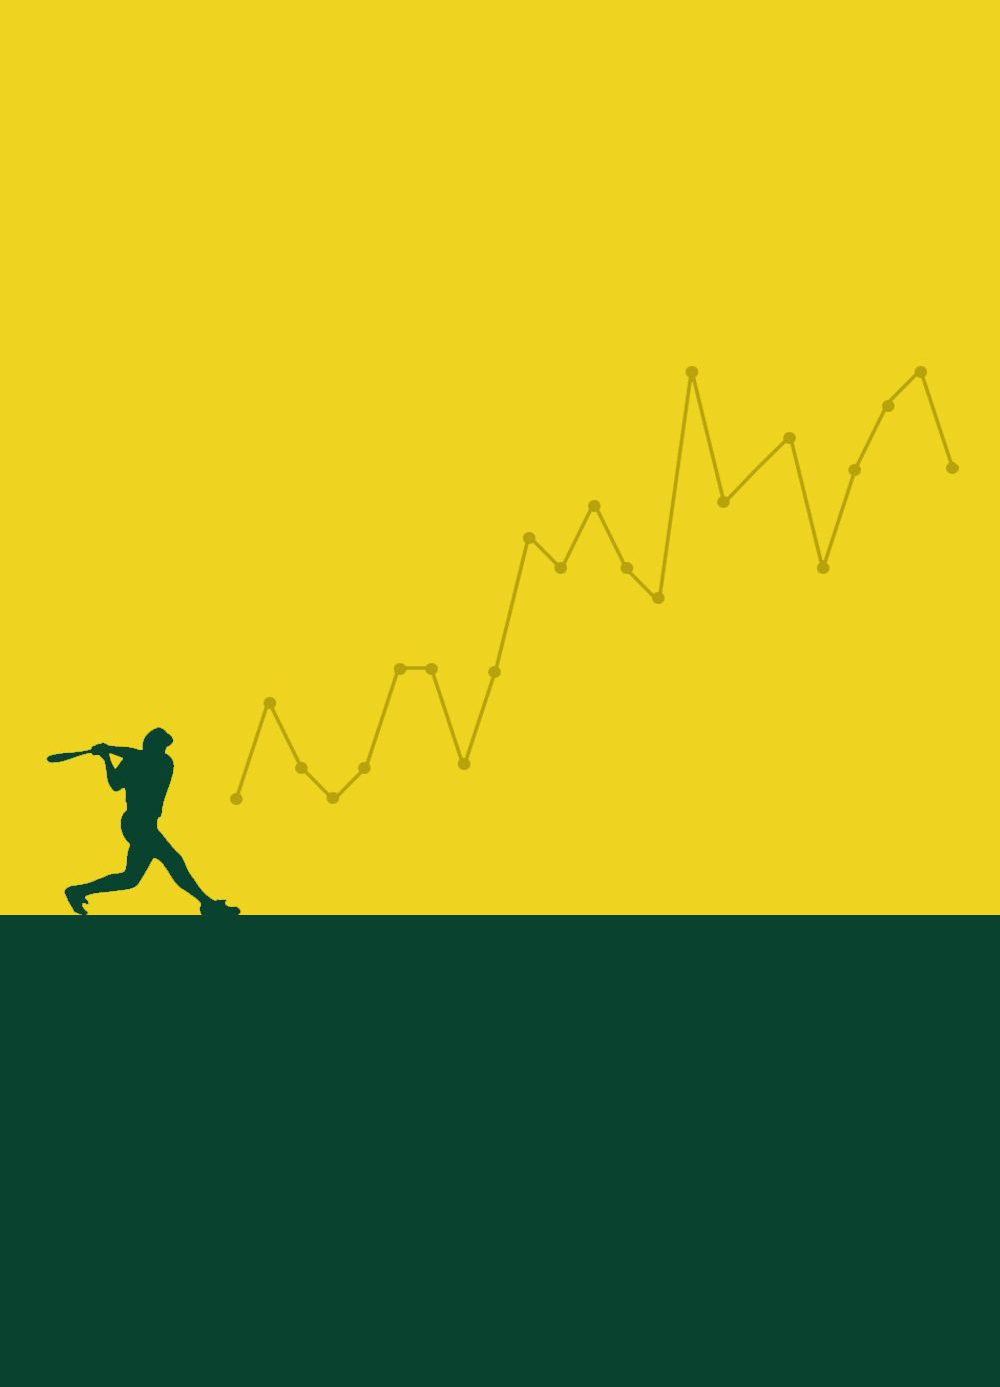 Graphic of a baseball player hitting a ball with a trajectory shape that looks like a line chart moving up- and to-the-right.